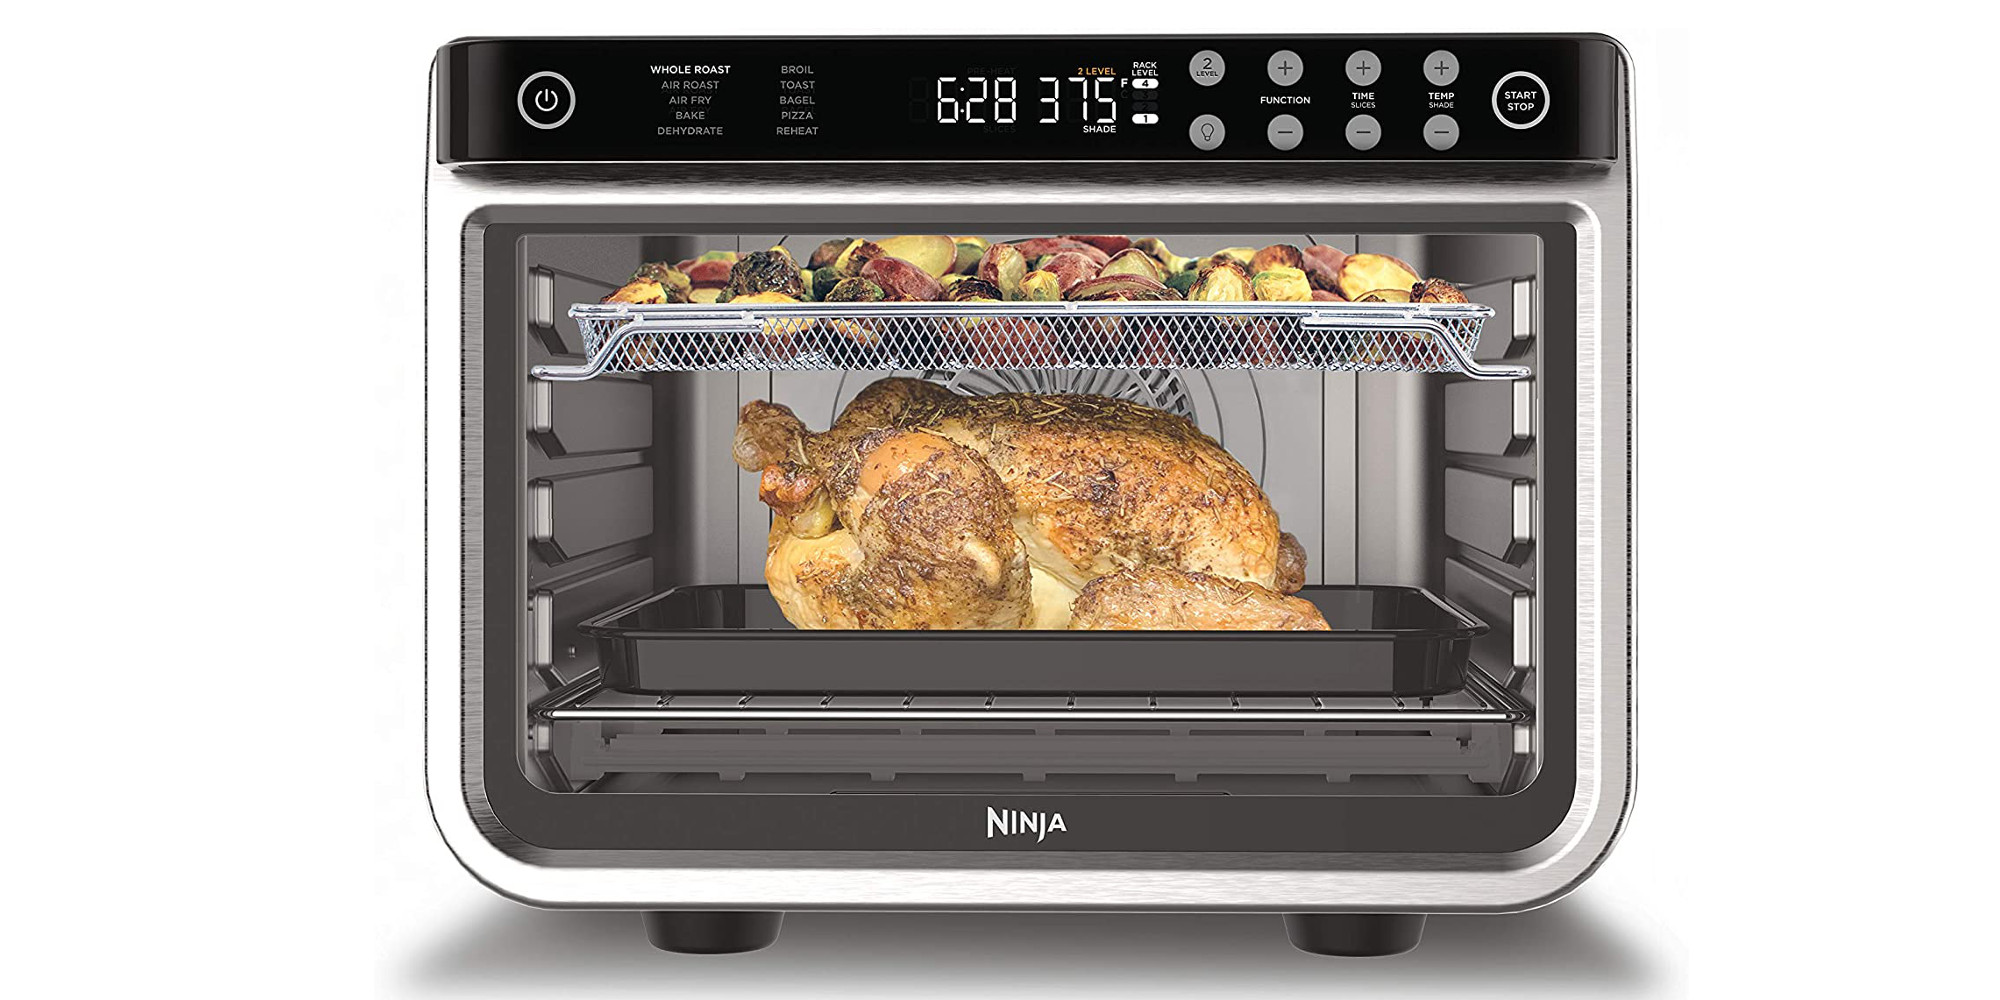 https://9to5toys.com/wp-content/uploads/sites/5/2021/06/Ninja-DT201-Foodi-10-in-1-XL-Pro-Air-Fry-Digital-Countertop-Convection-Toaster-Oven.jpg